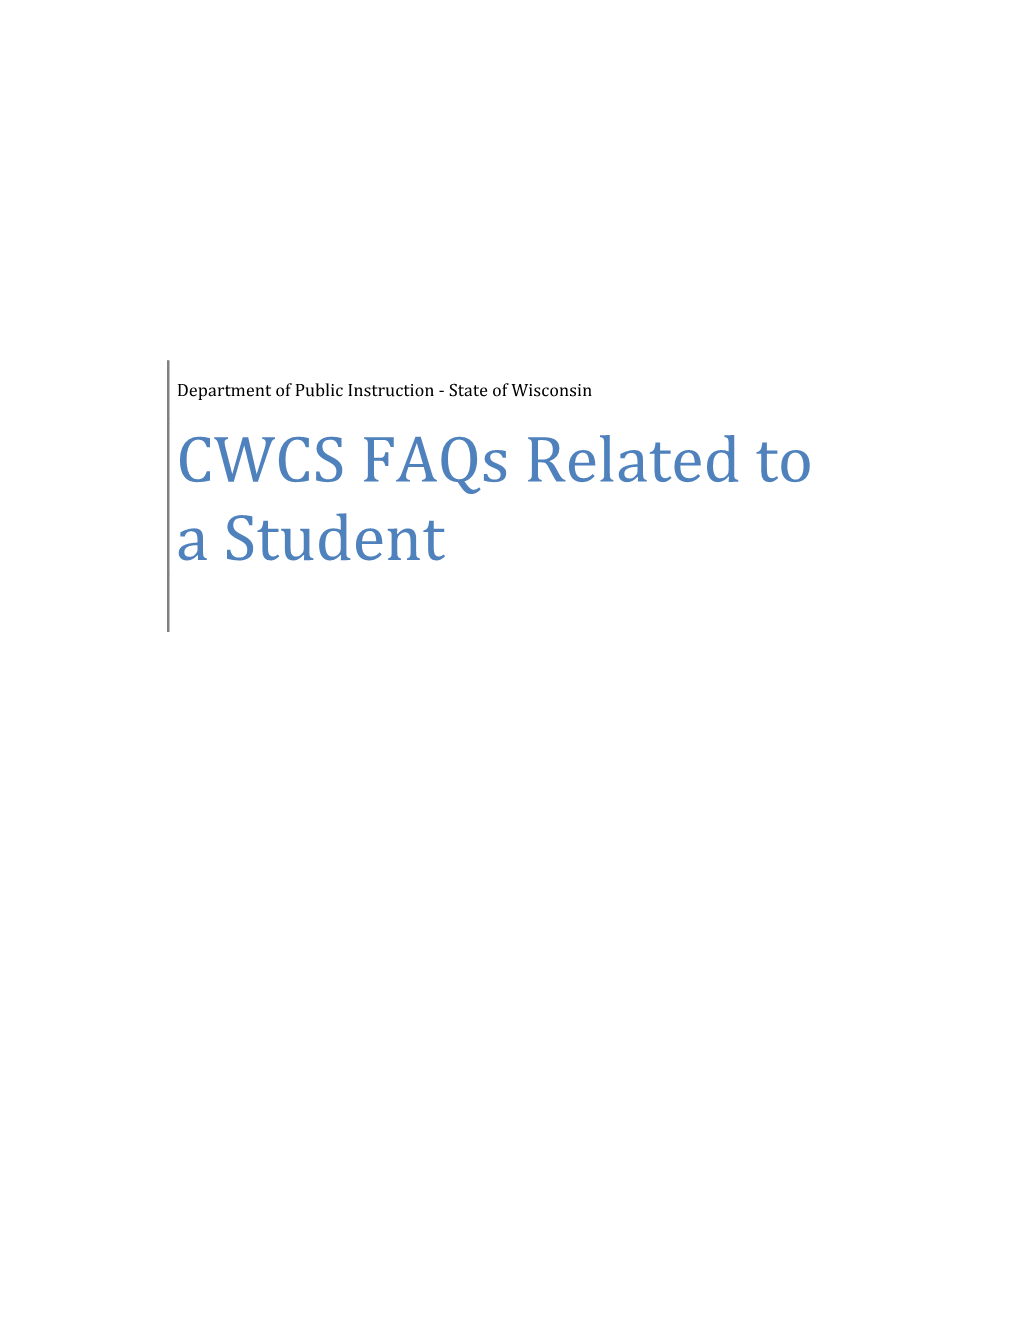 CWCS Faqs Related to a Student